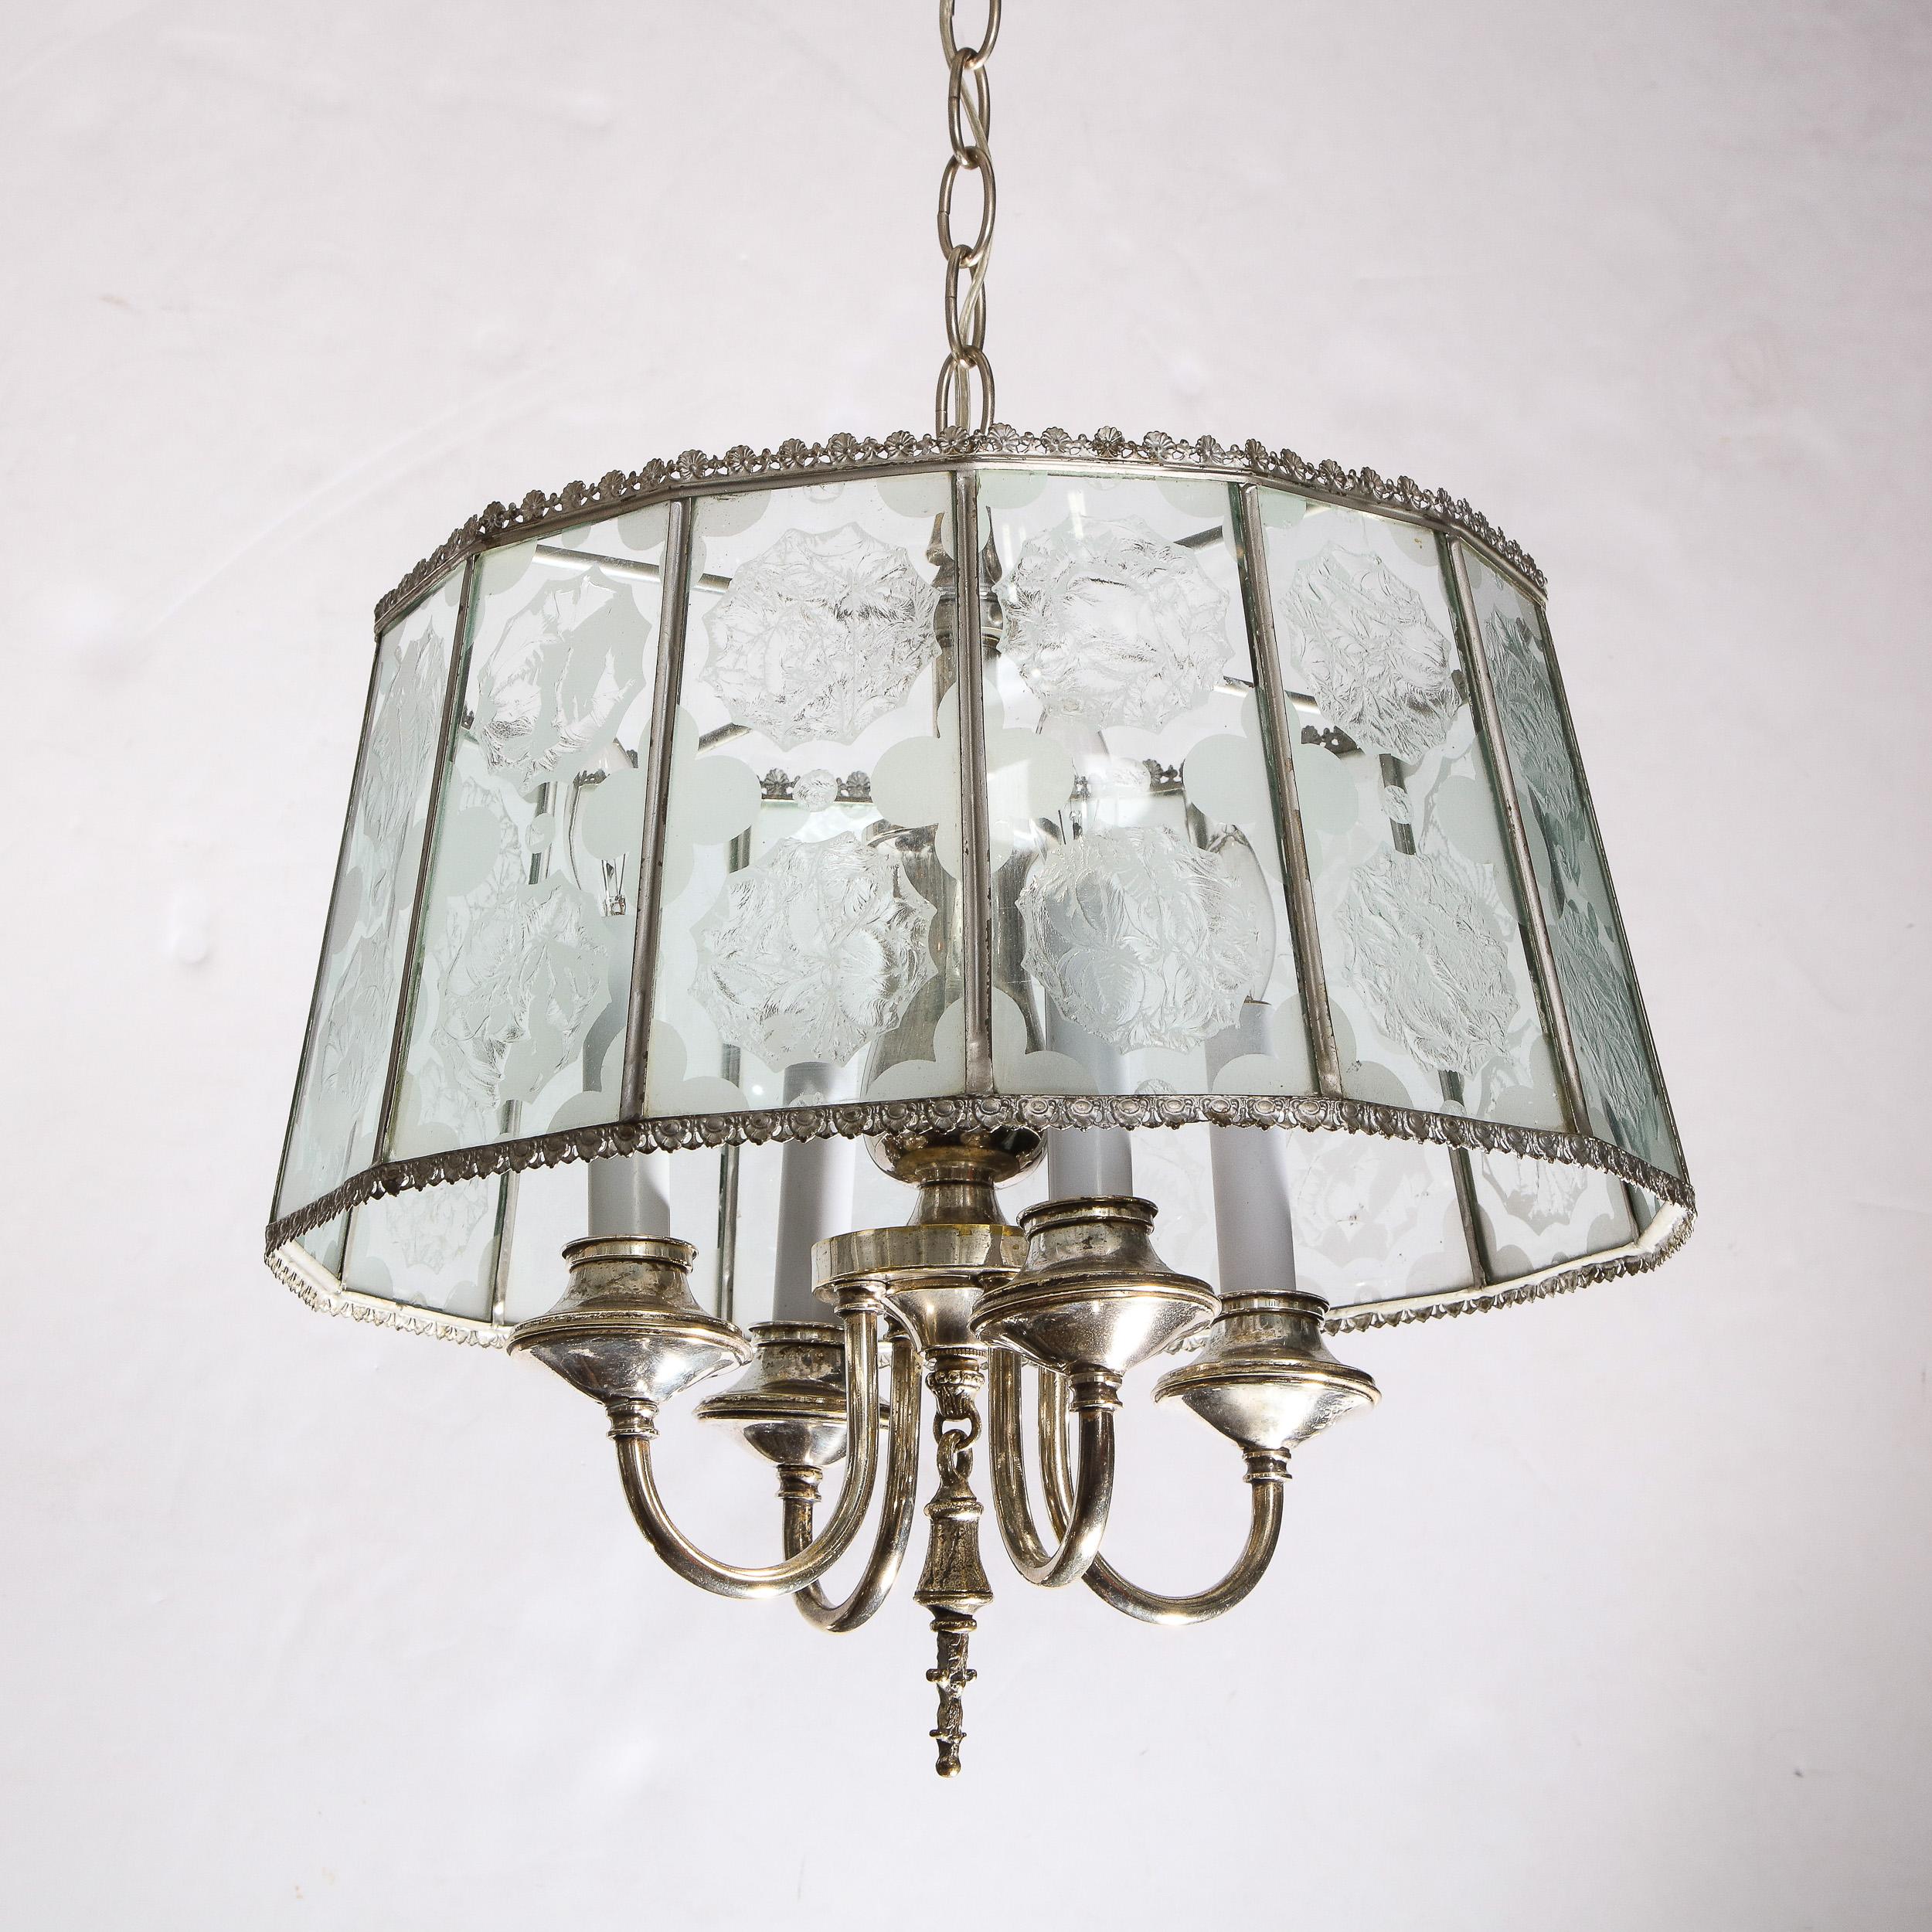 
This beautiful Art Deco revival pendant was realized in the United States, during the latter half of the 20th century. It features a multitude of translucent glass panels replete with a wealth of abstract textured glass embellishments as well as